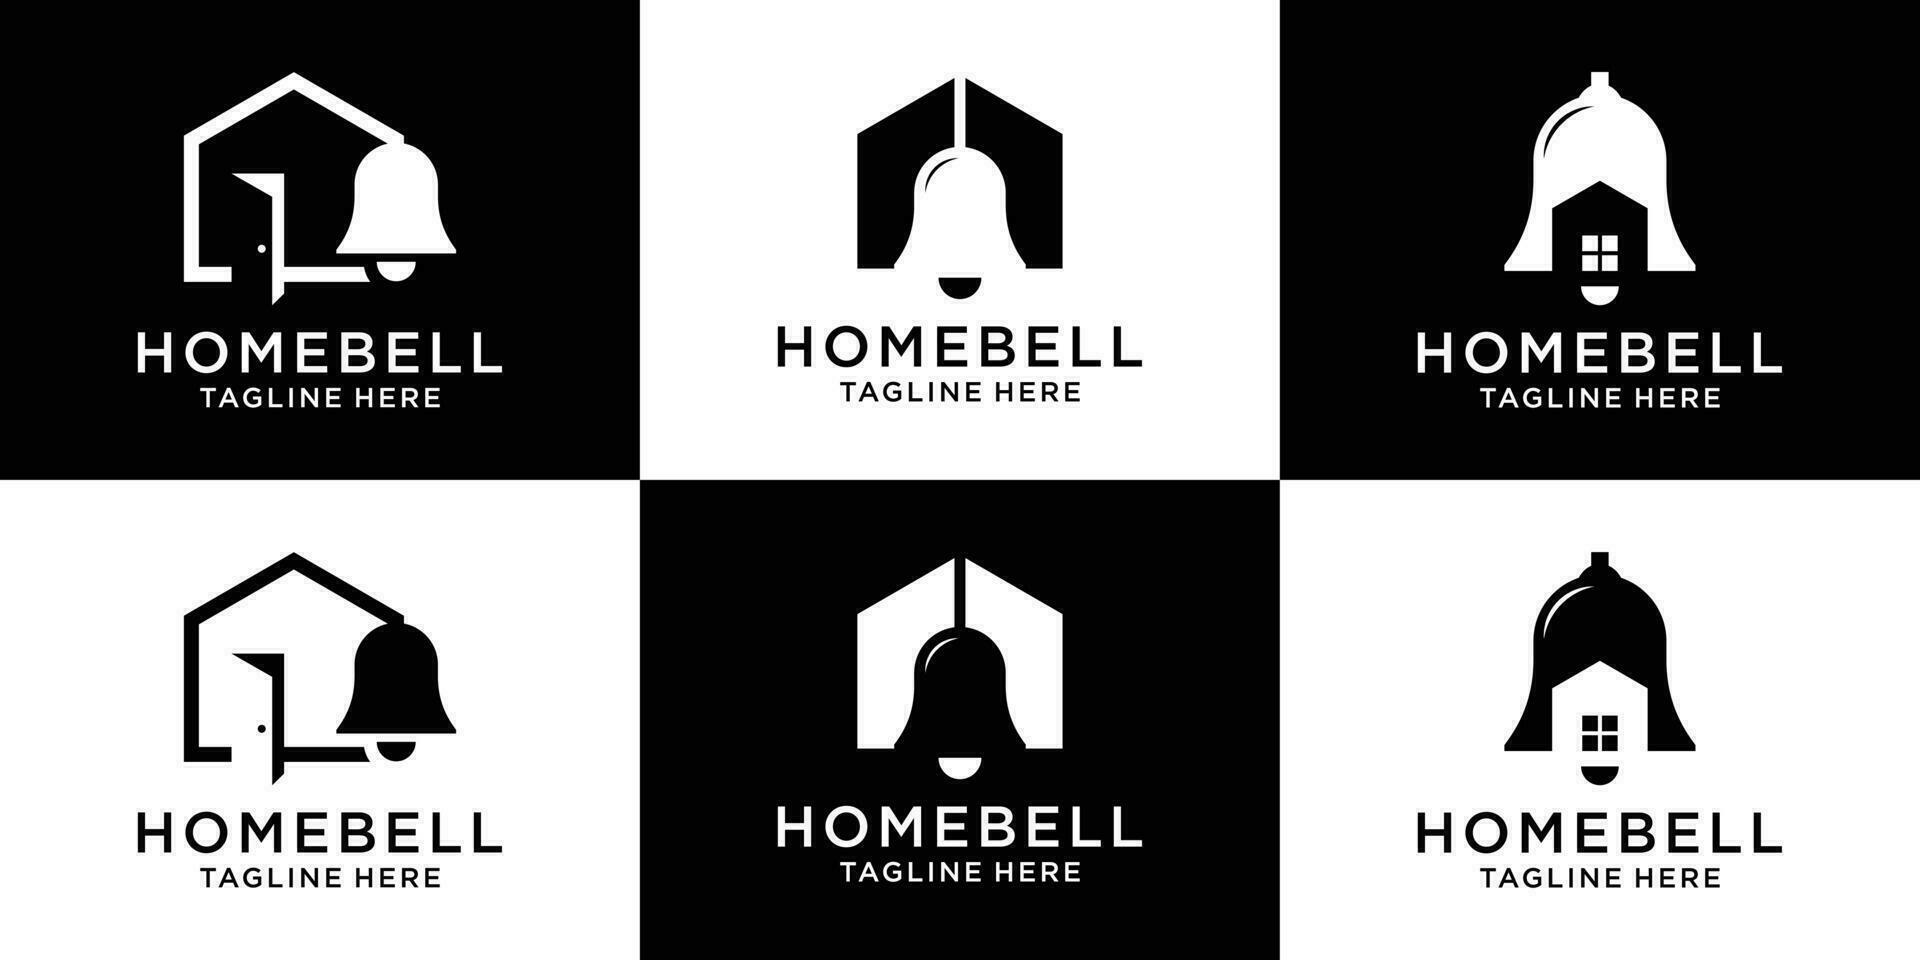 logo design home with bell combined creative template vector